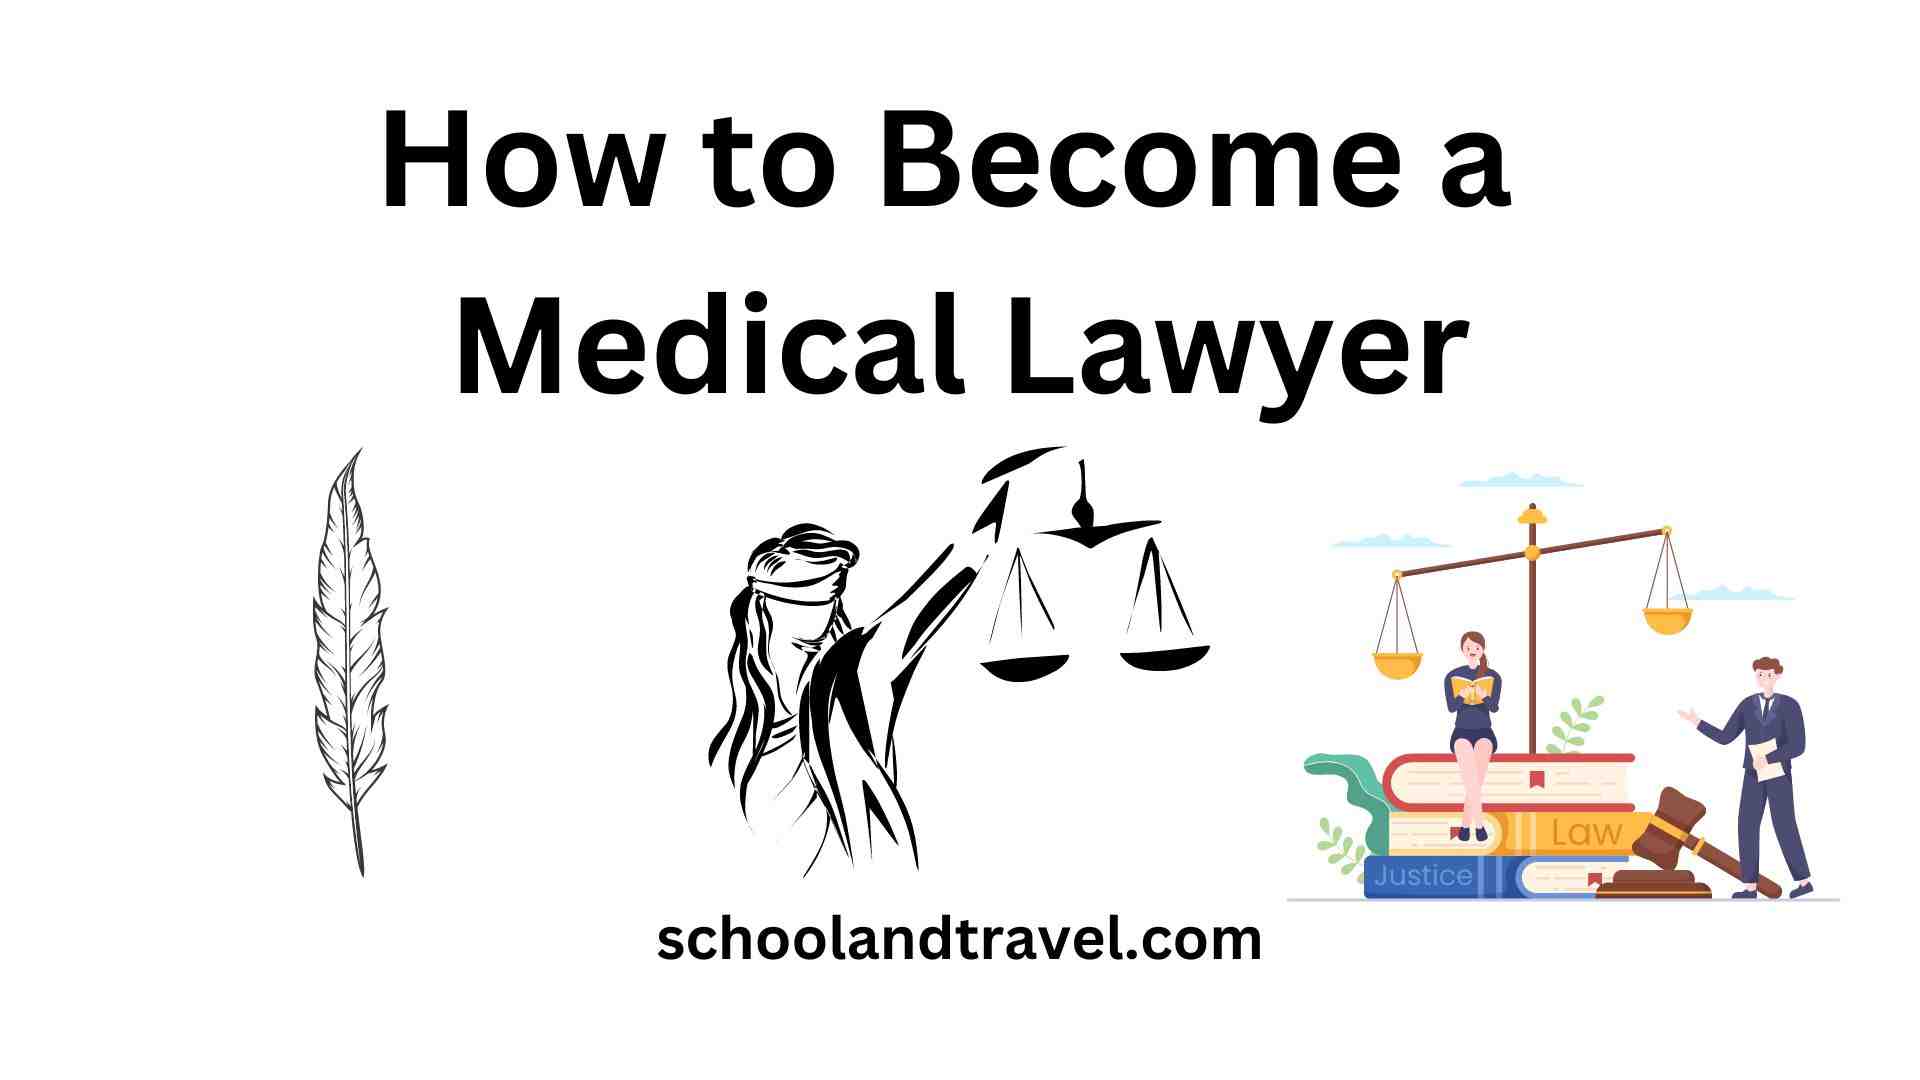 How to Become a Medical Lawyer